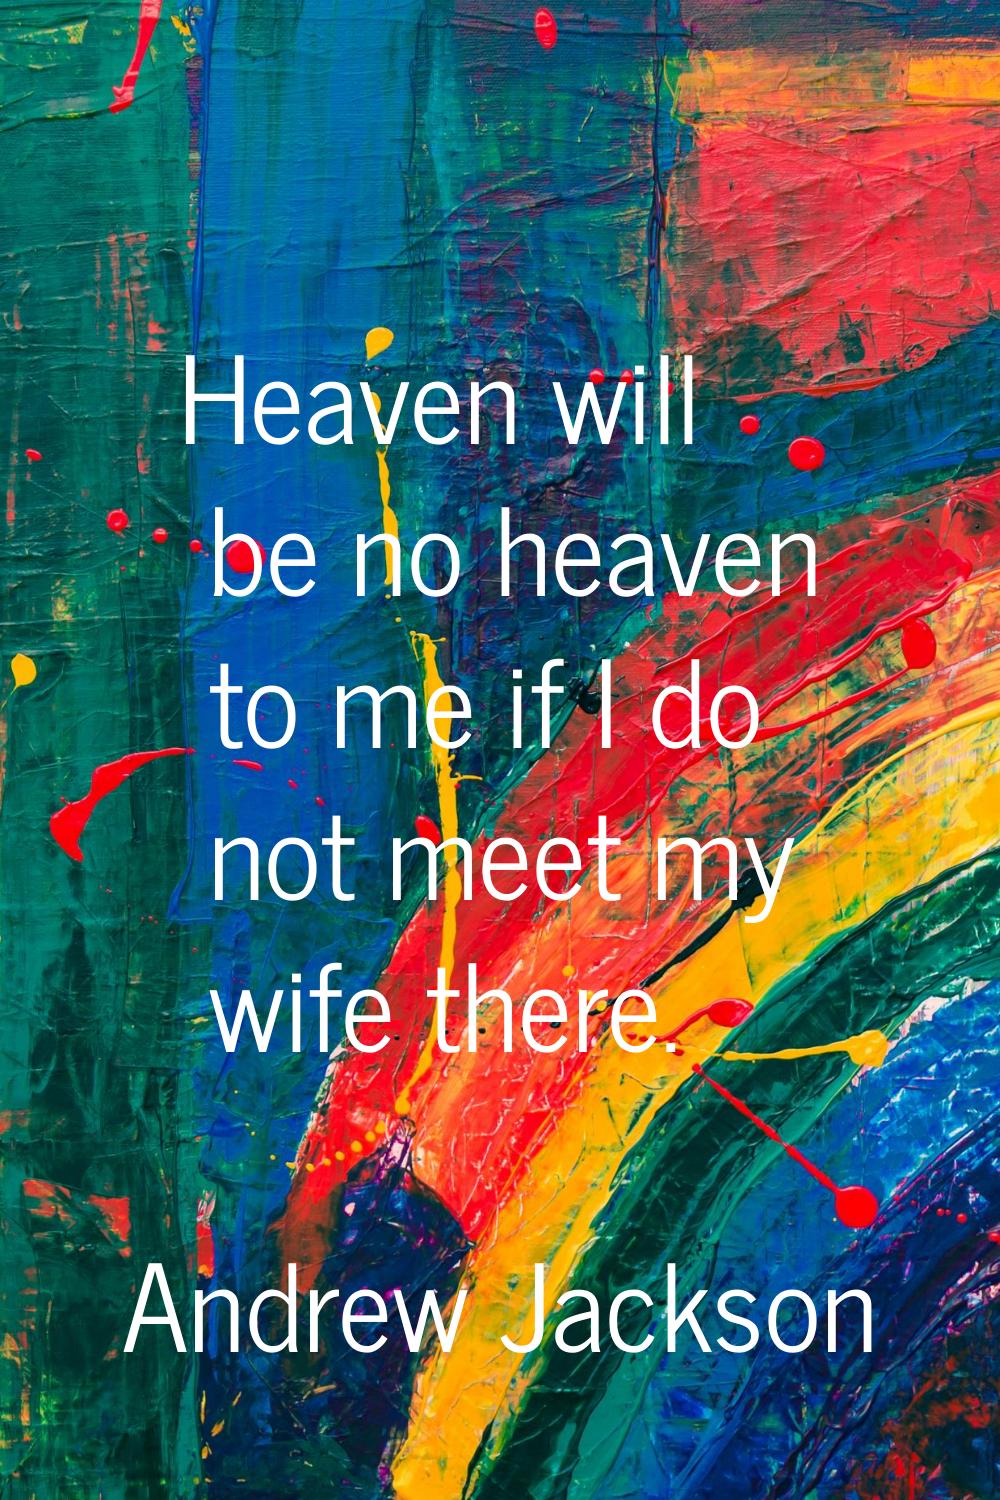 Heaven will be no heaven to me if I do not meet my wife there.